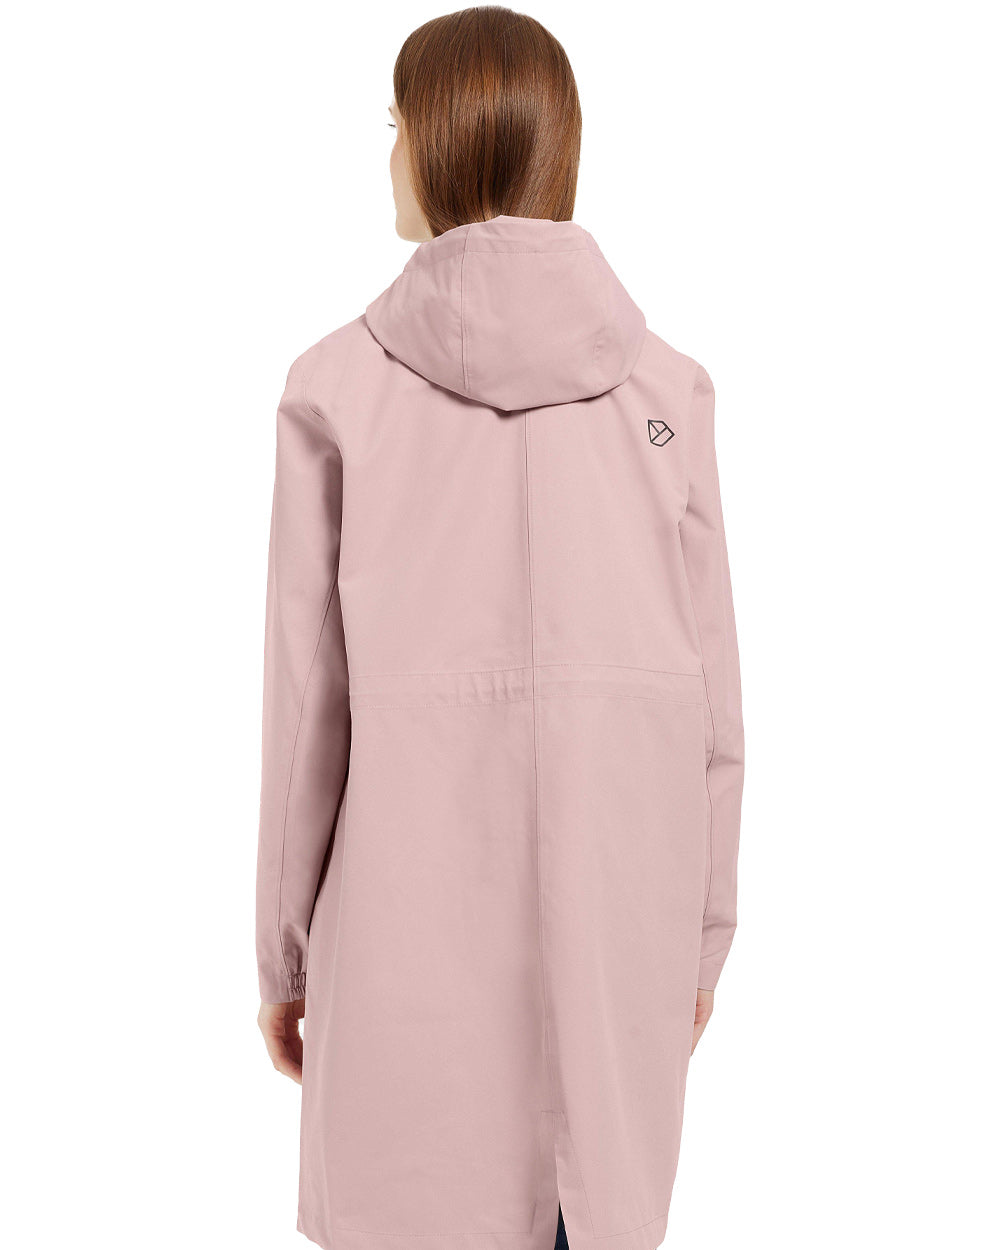 Oyster Lilac Coloured Didriksons Marta Womens Parka 3 On A White Background 